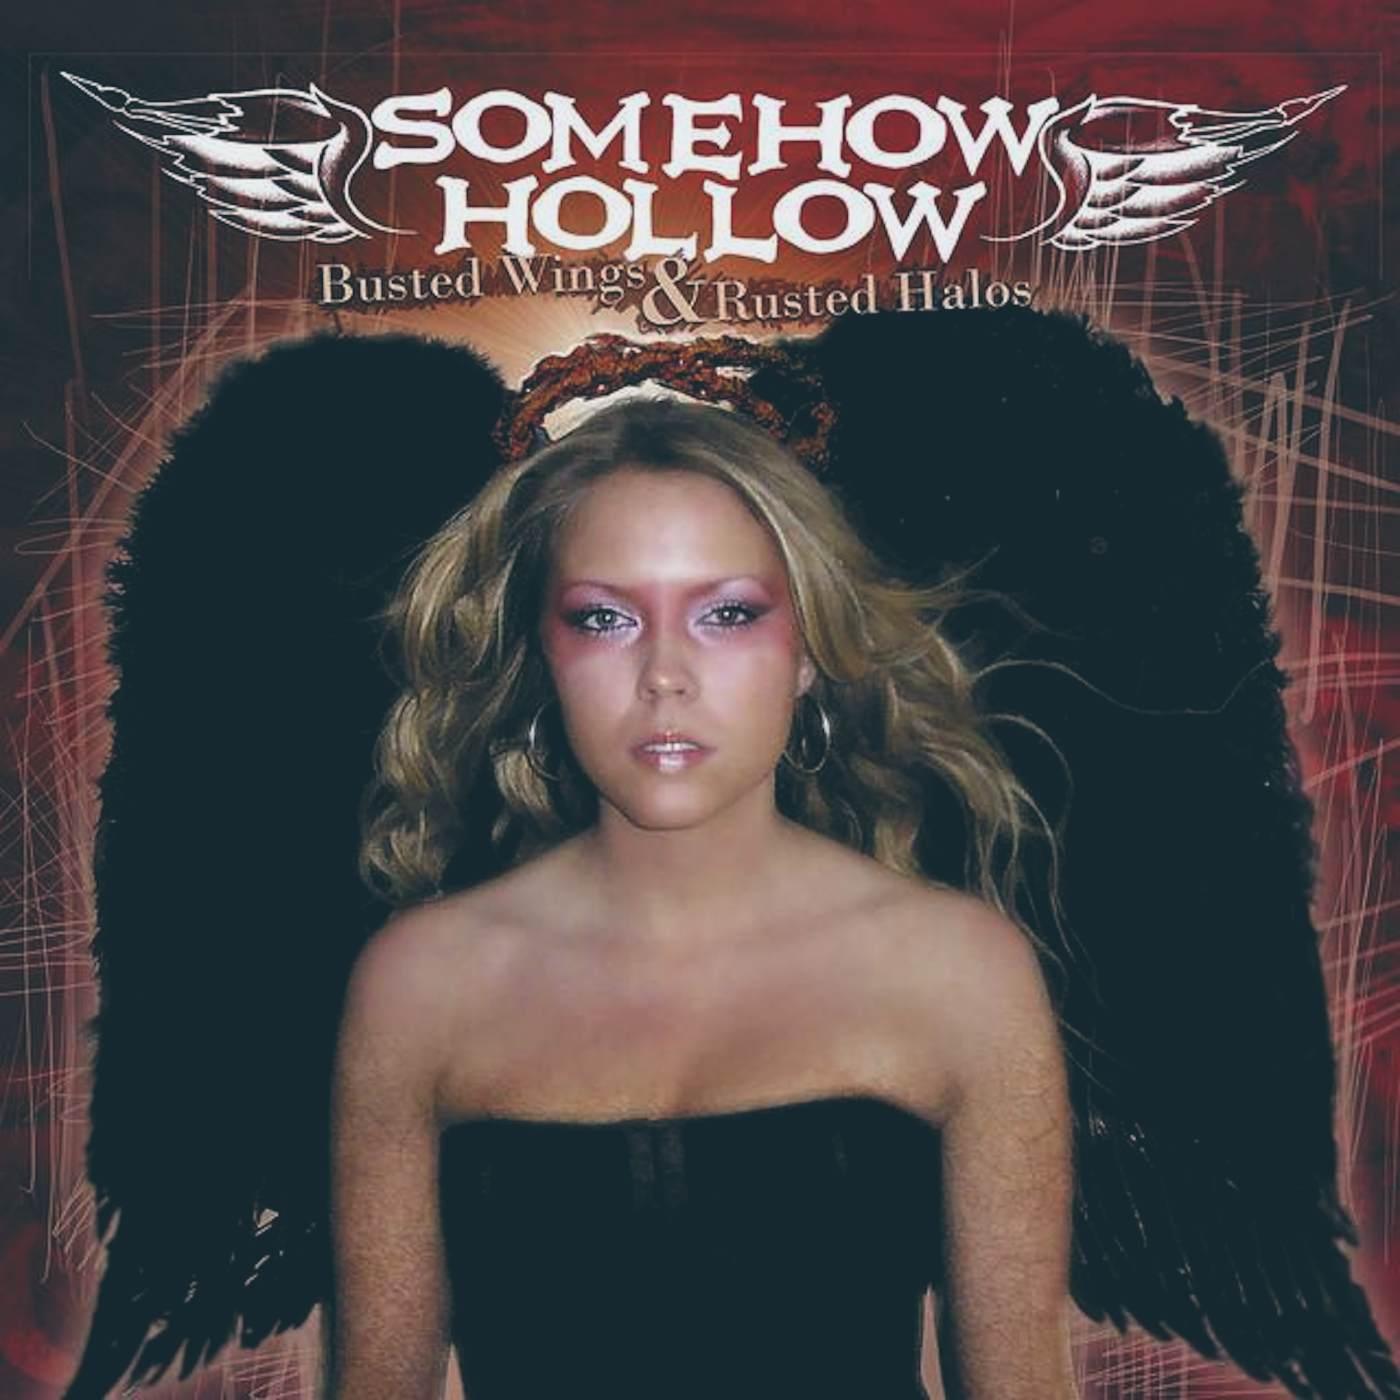 Somehow Hollow